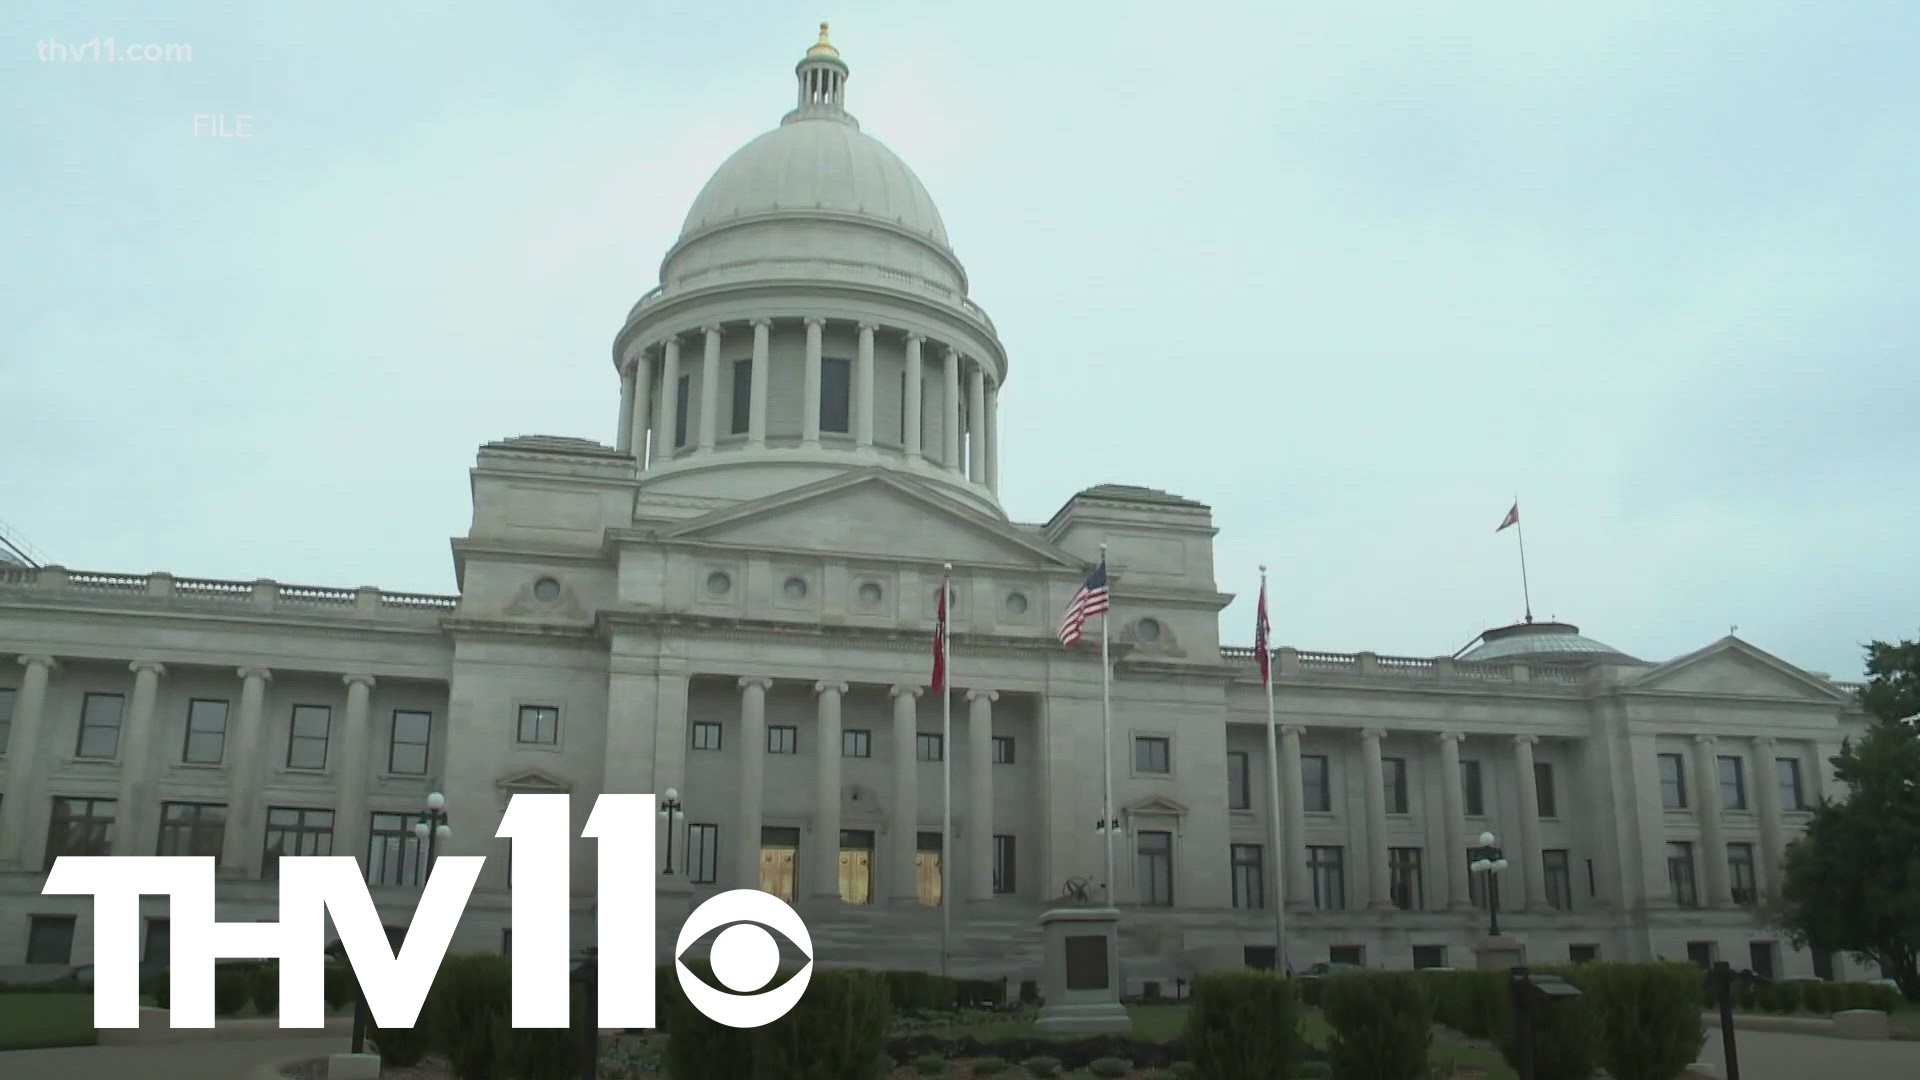 On Monday night, there was a new bill filed that involves Arkansas's Freedom of Information Act. Here's what to know.